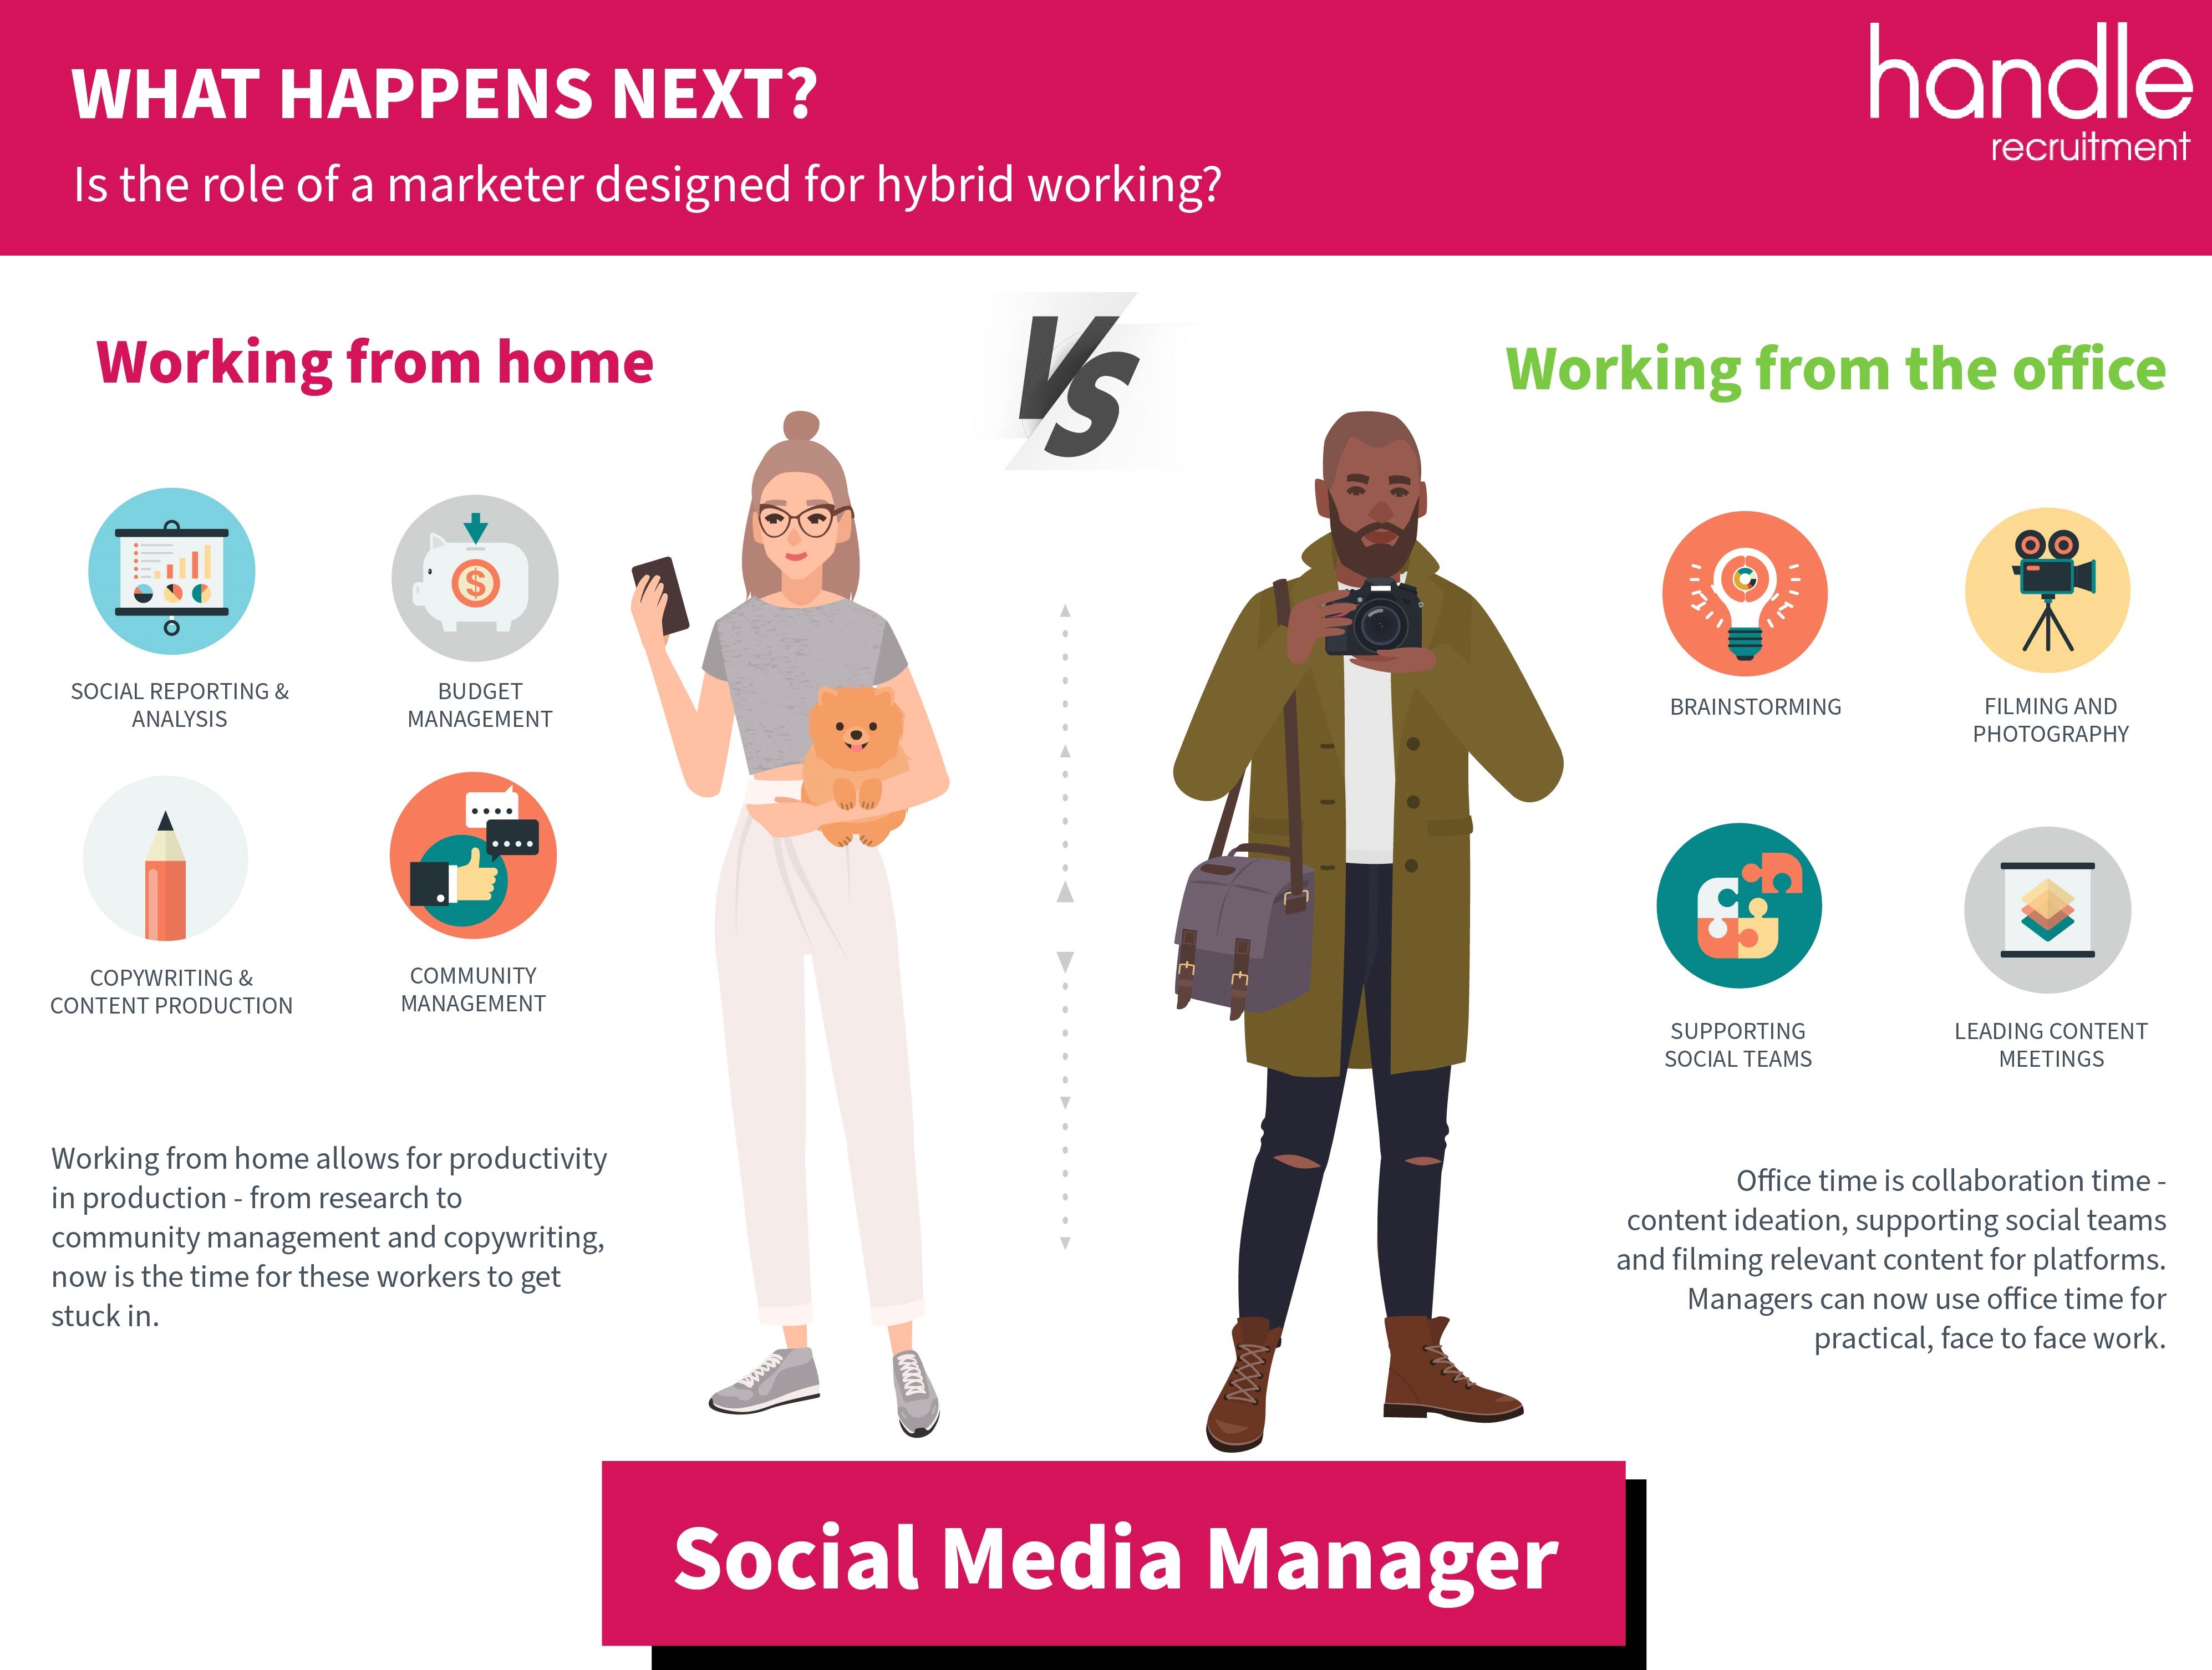 Social Media Manager - from home and from the office